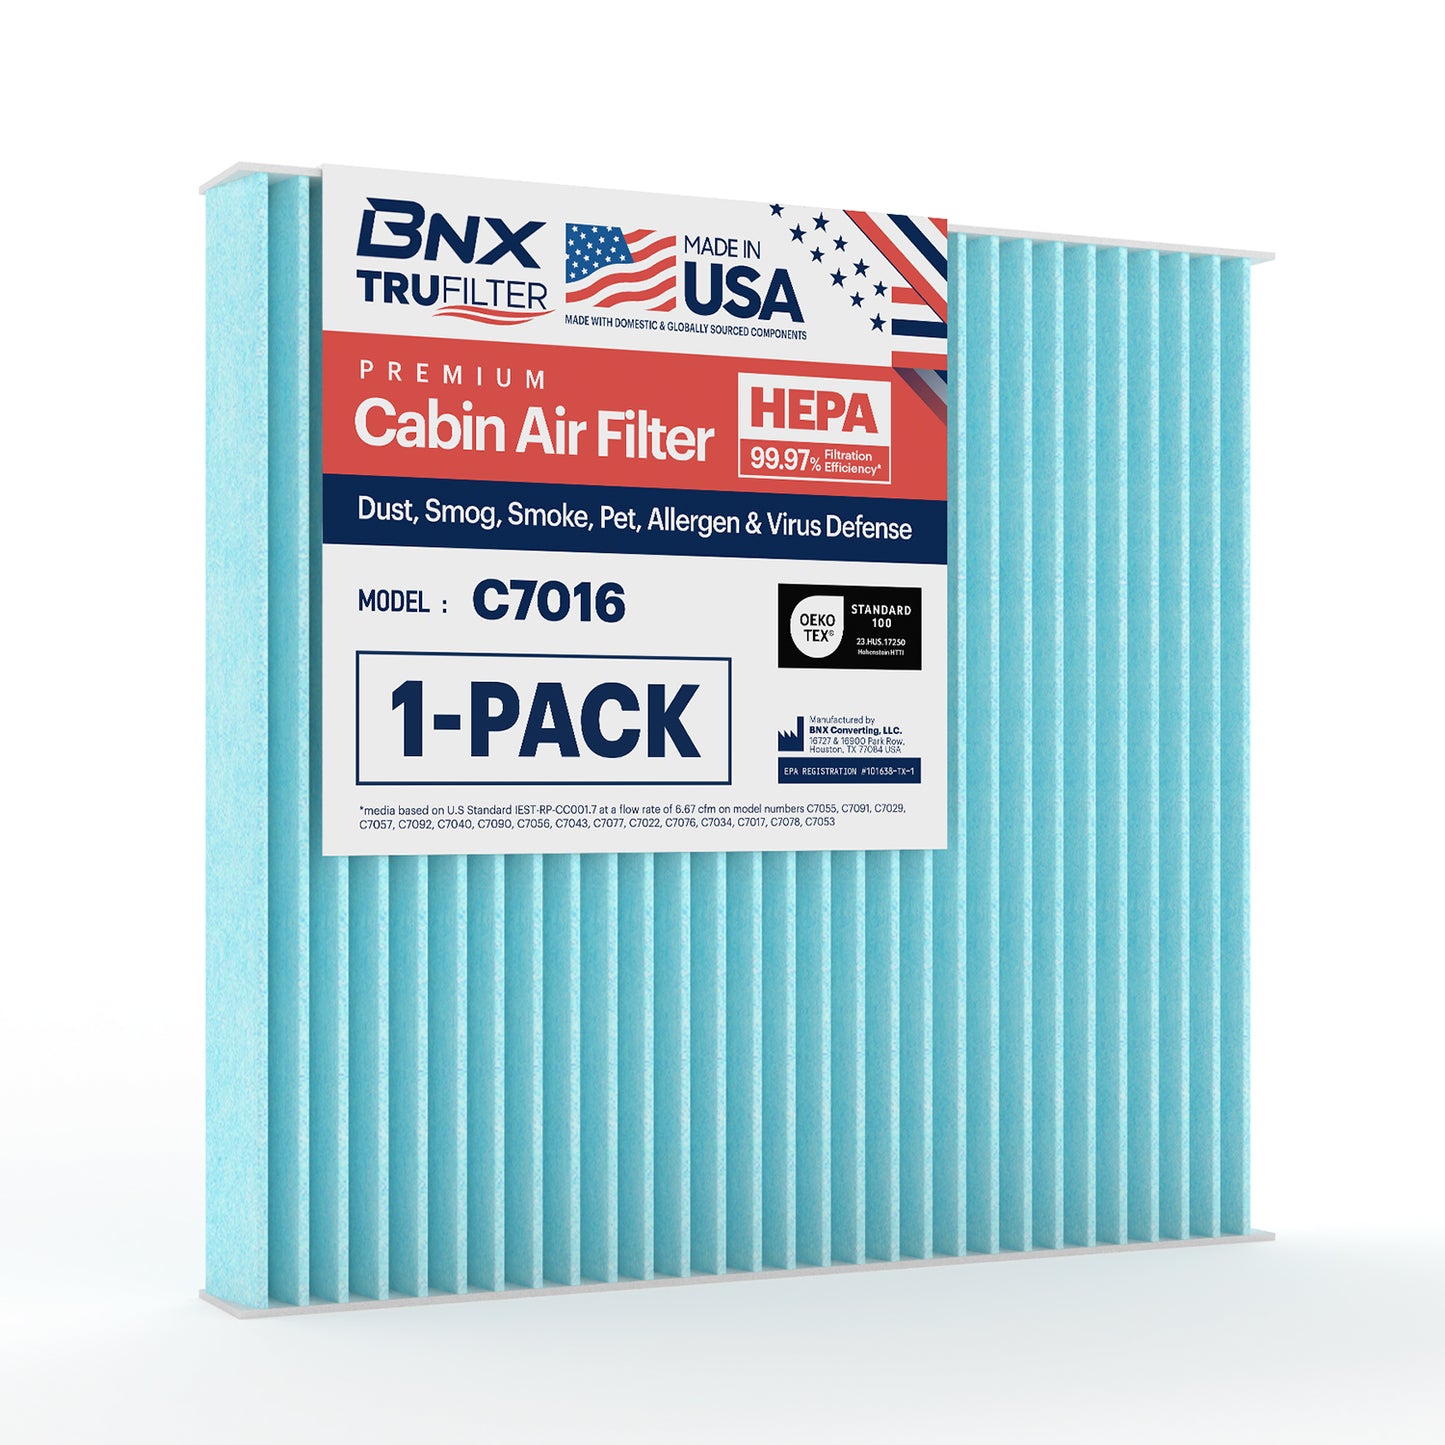 BNX TruFilter C7016 Cabin Air Filter, HEPA 99.97%, MADE IN USA, Compatible With Ram: 1500 Pickup; Chrysler: 200, Sebring; Dodge: Avenger, Caliber, Journey; Compatible with Jeep: Compass, Patriot